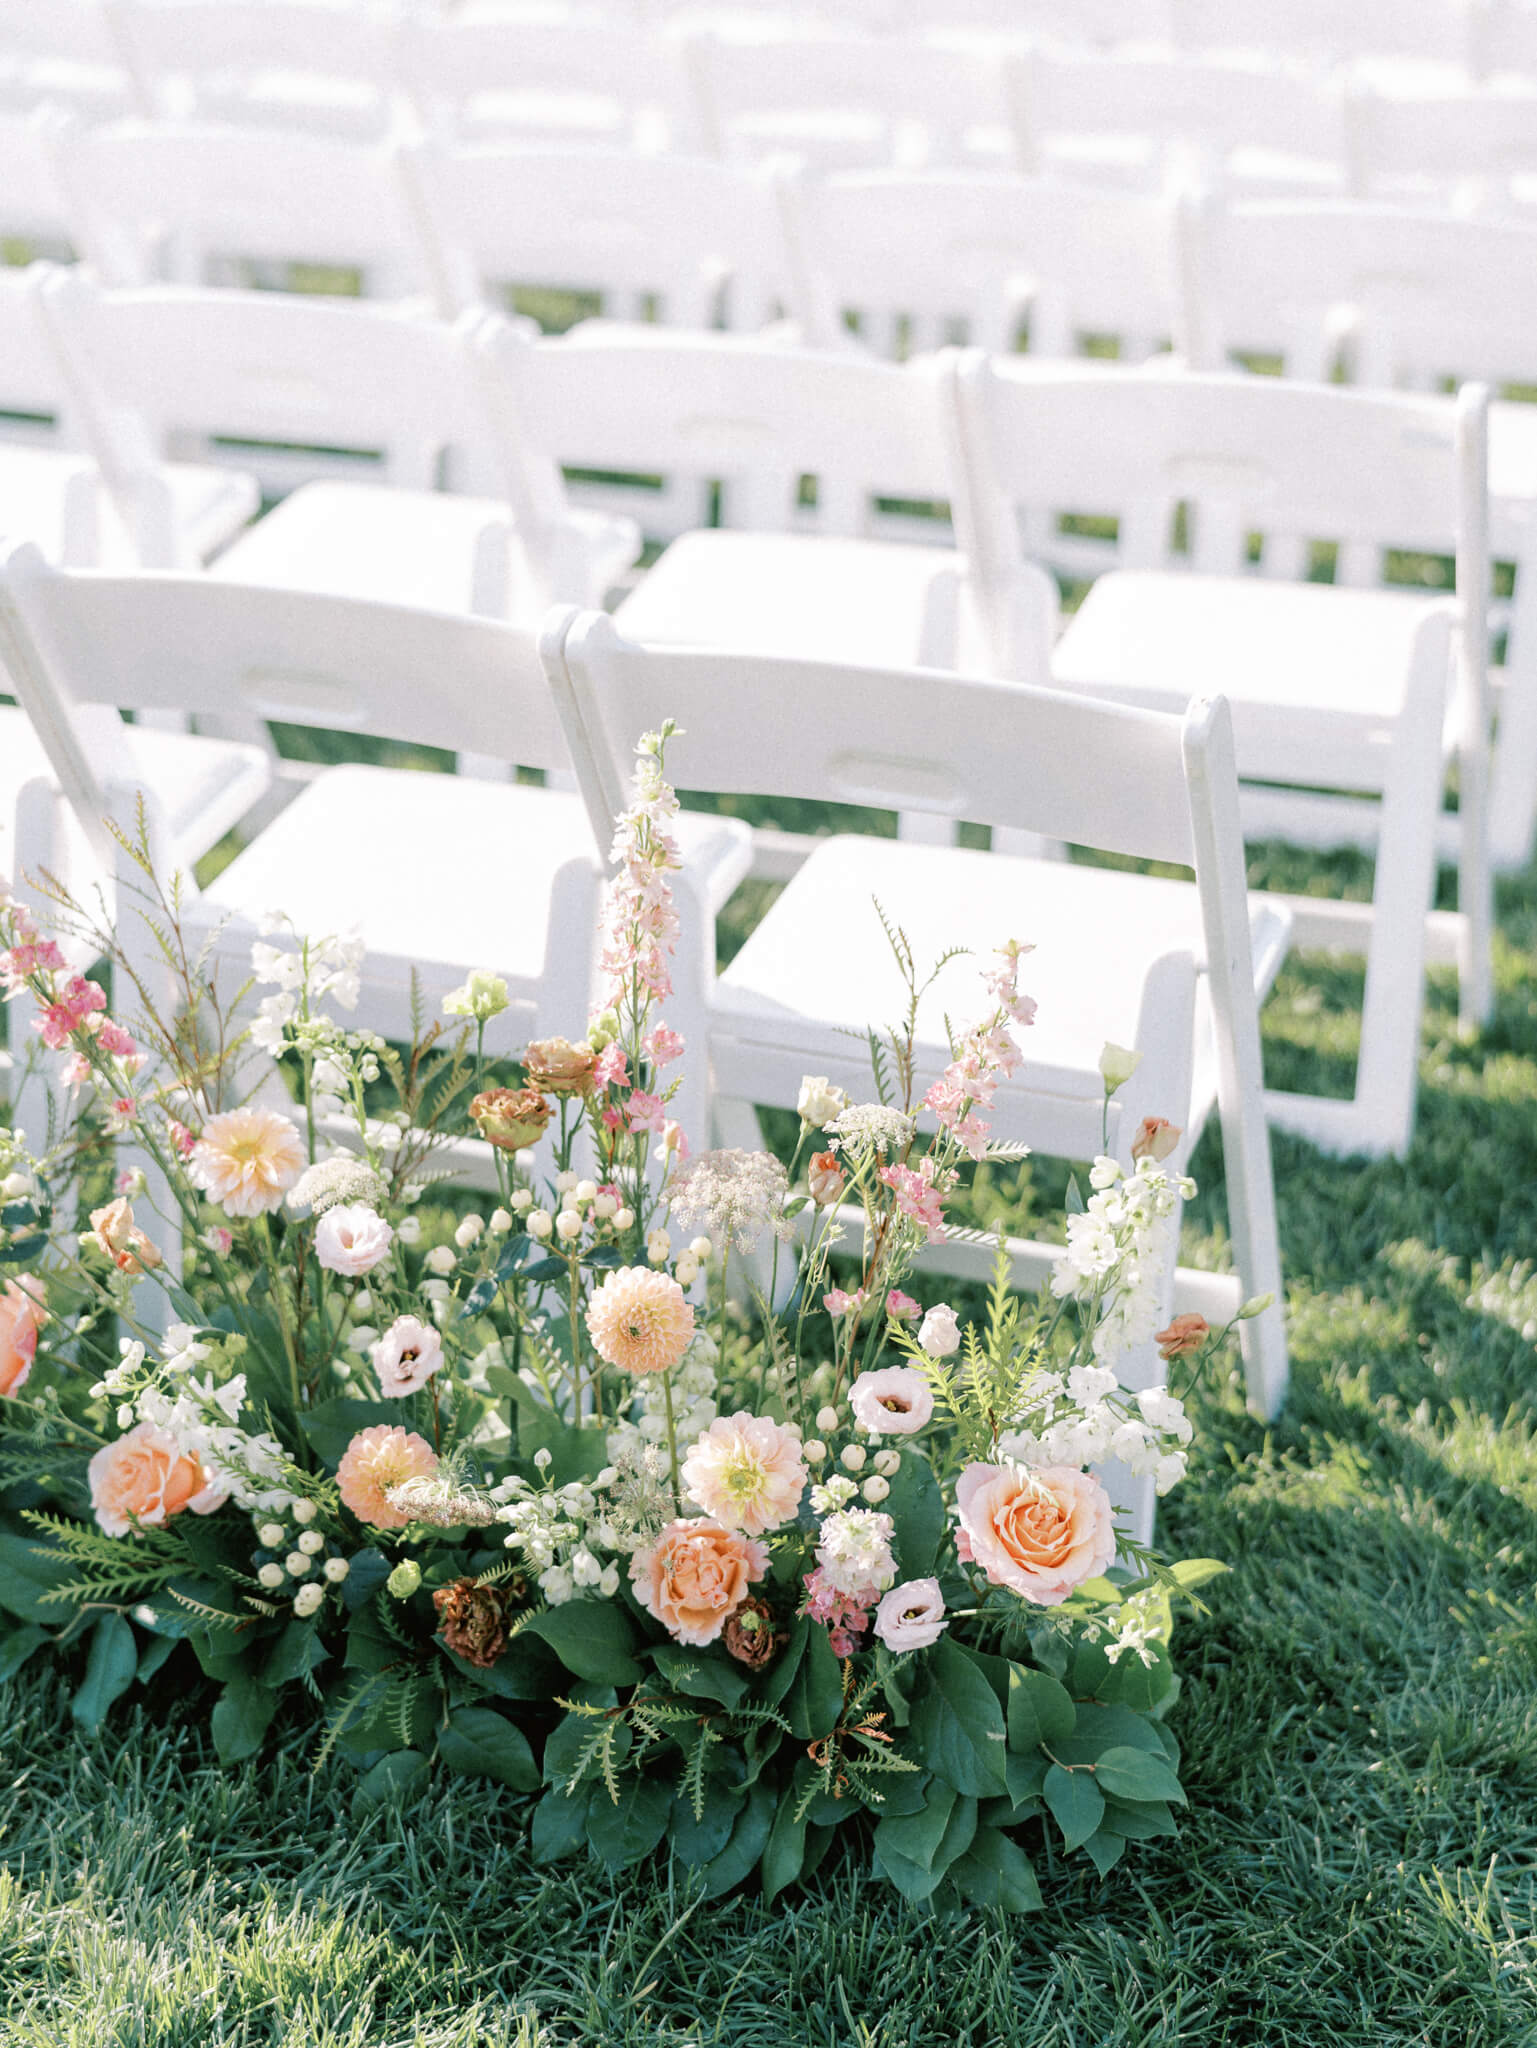 White wooden folding chairs and peach colored floral pieces at a Pippin Hill wedding ceremony.